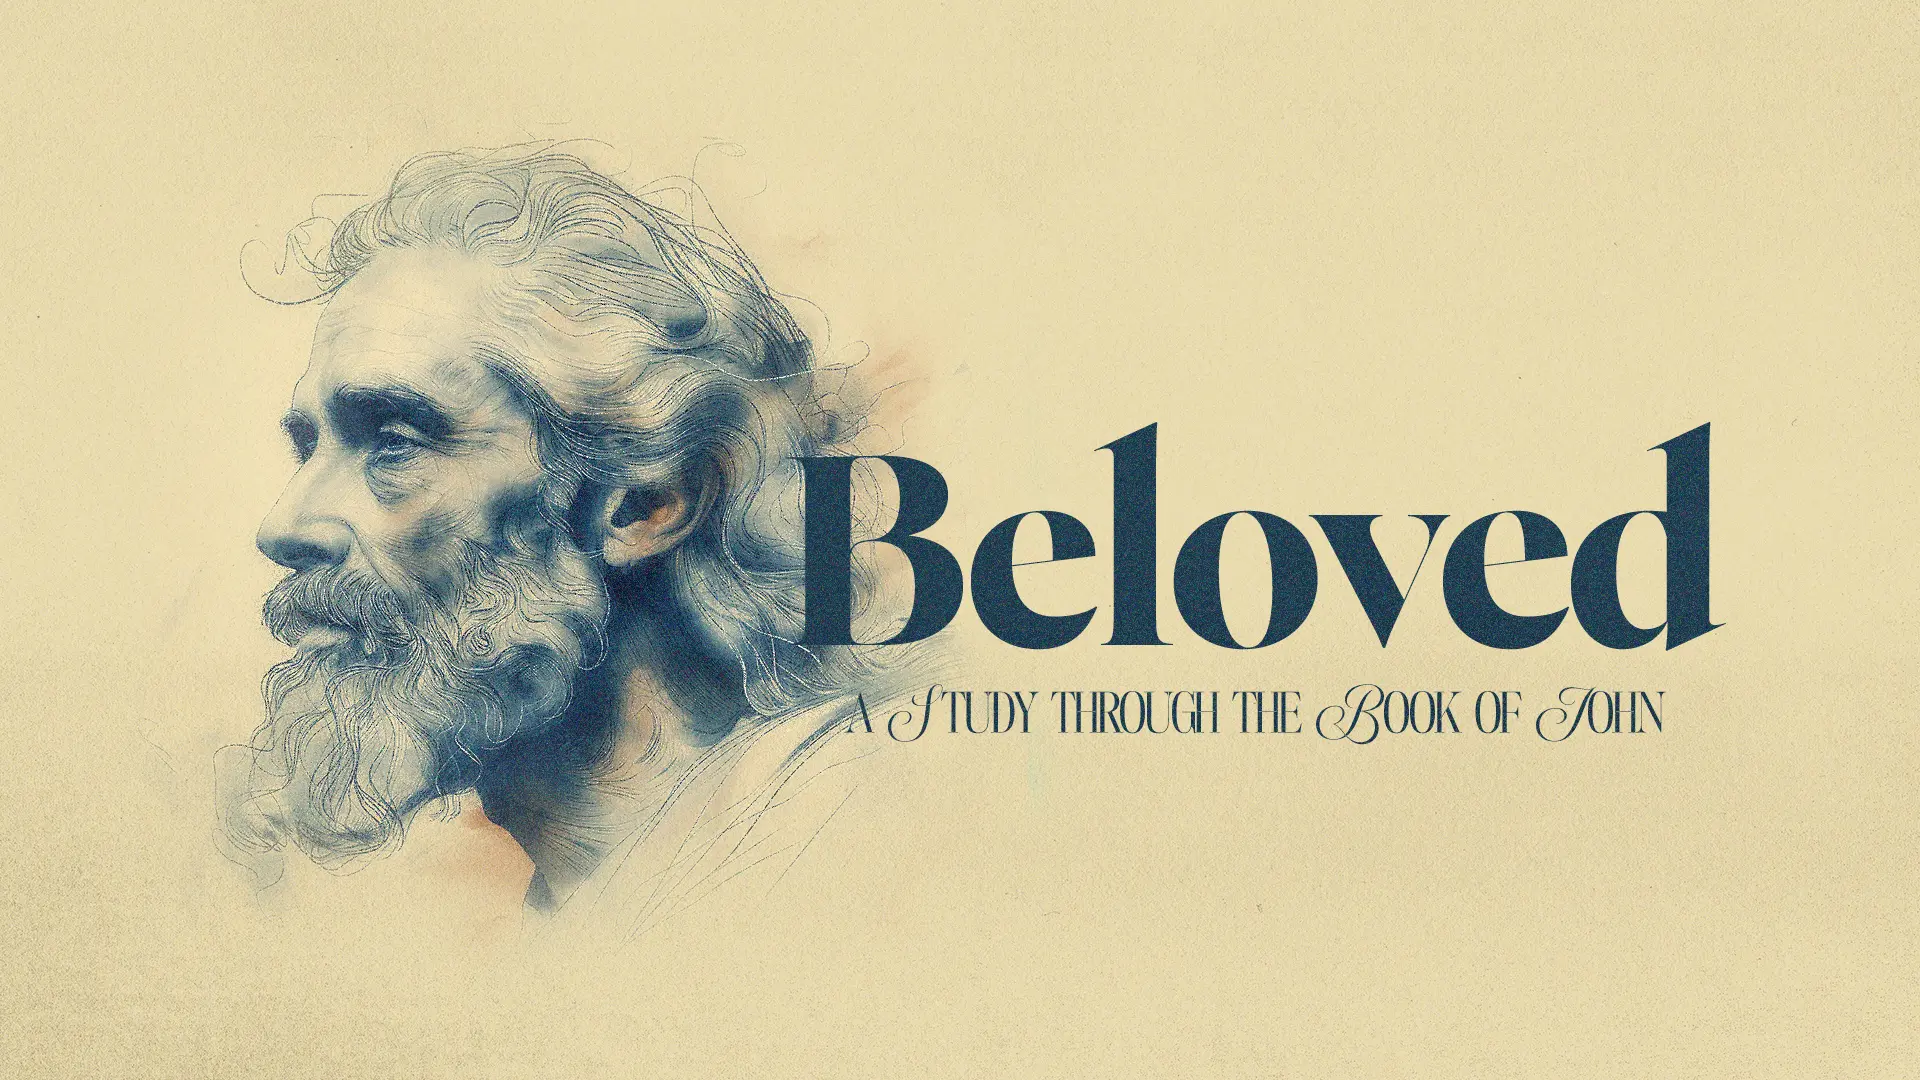 This &Quot;Beloved&Quot; Sermon Series Template Captures The Essence Of Contemplation And Reverence, Making It A Profound Choice For Church Media Focused On The Book Of John. With Its Serene Artwork And Bold Typography, It Resonates Deeply With The Spiritual Journey.